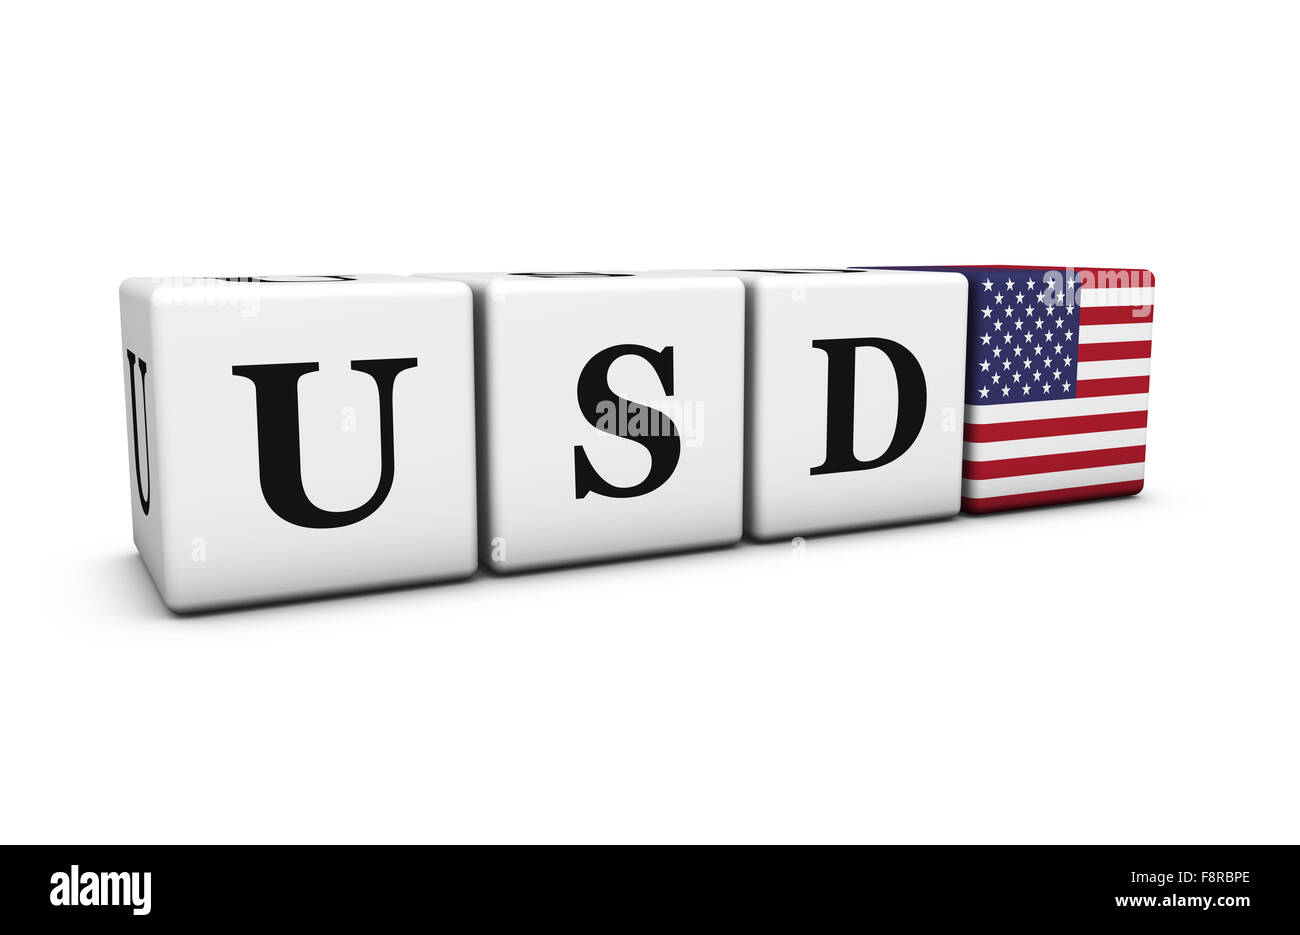 Currency rates, exchange stock market and financial trading concept with dollars usd code sign and US flag on cubes. Stock Photo